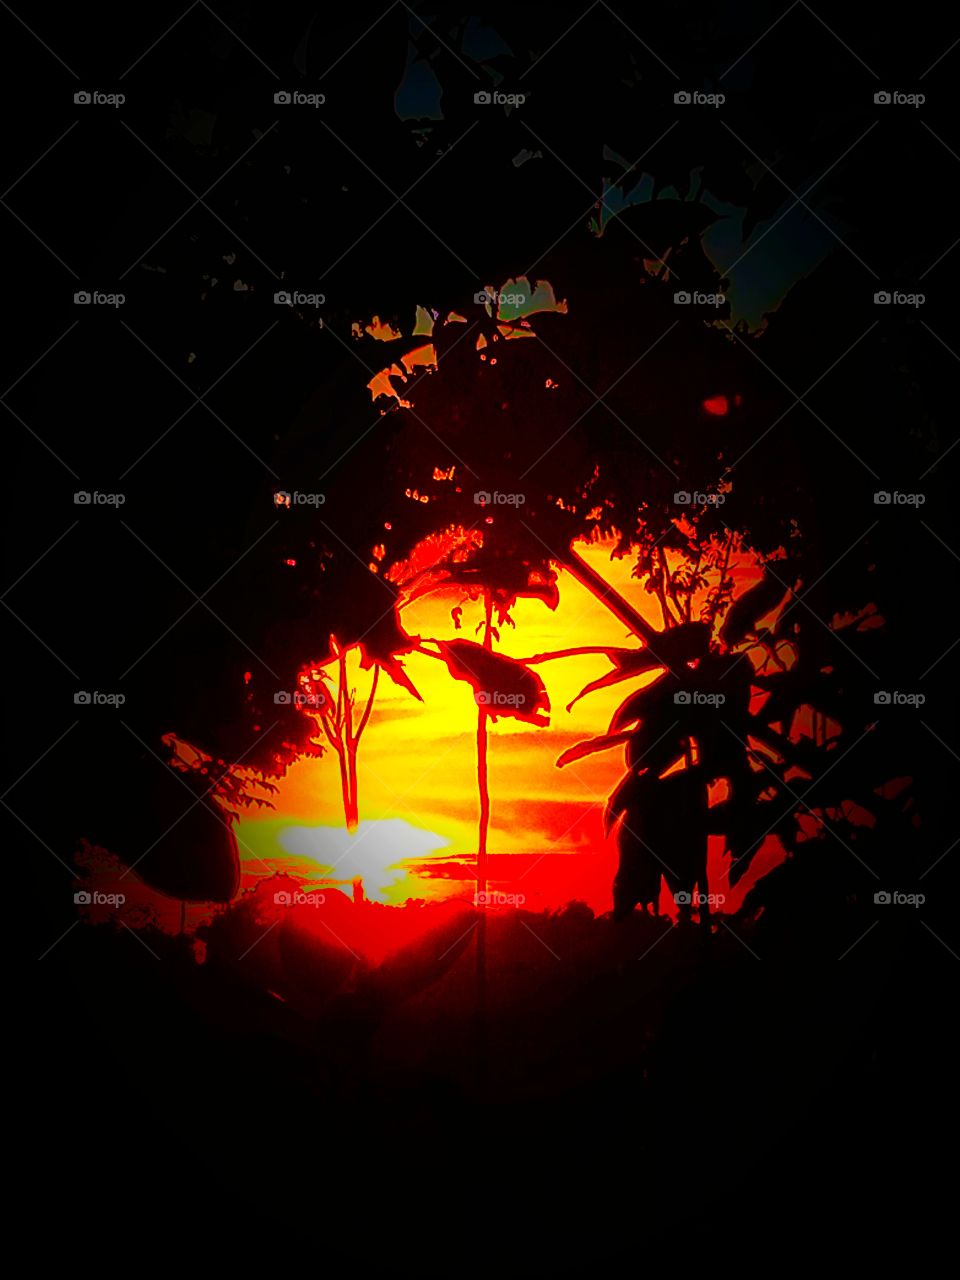 A Very Beautiful Evening Time Nature, With Sunset,  Under The Tree.